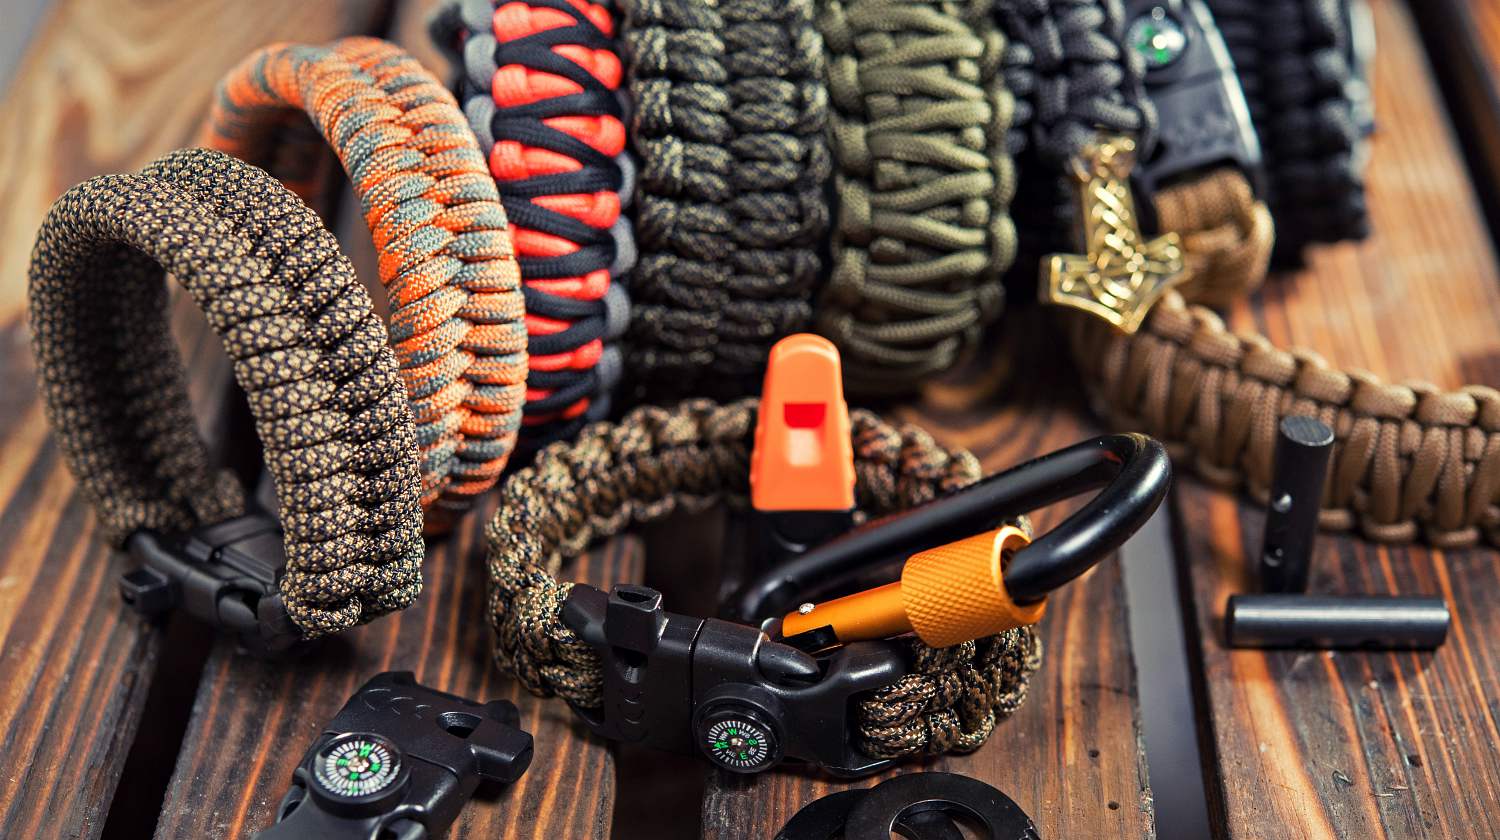 Paracord bracelet military Perfect for Ru Paracord Survival Bracelet Military Grade Men’s Bracelet Premium Quality Outdoor Gear Mens Paracord Bracelet With Firestarter & Braided Survival Jewelry with Braided Firestarter By Paracord Planet